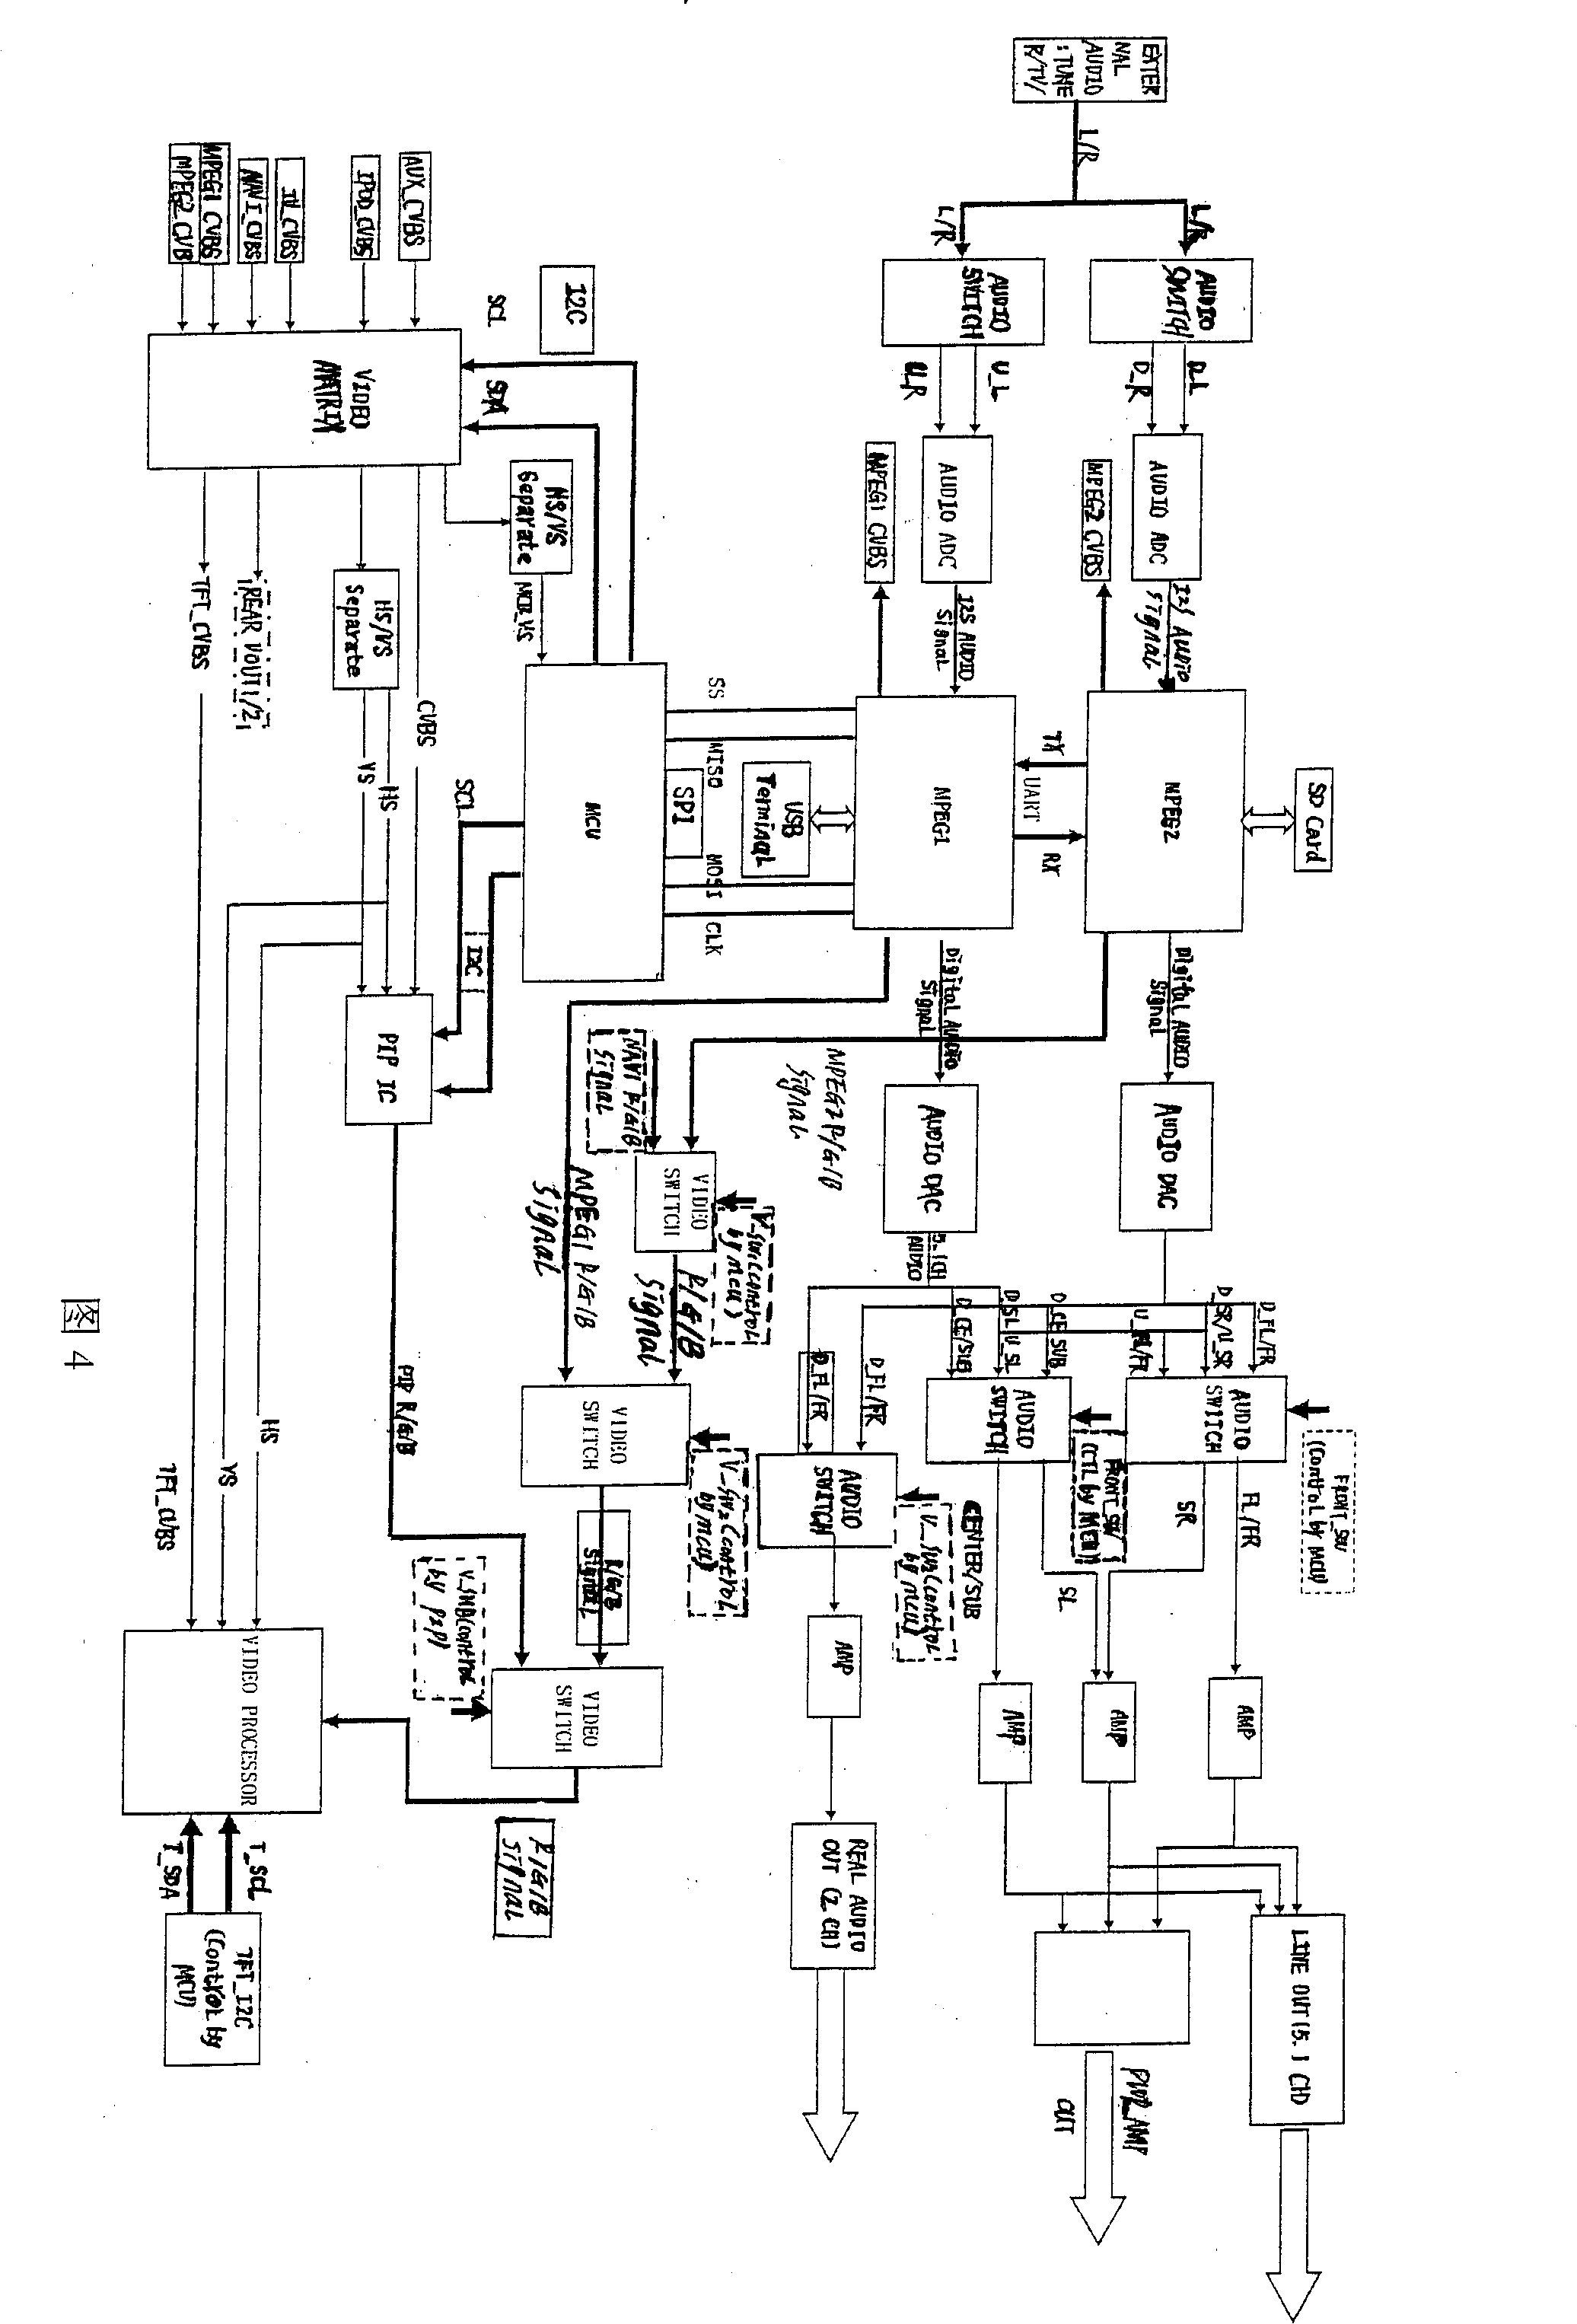 MIMO multimedia system and method